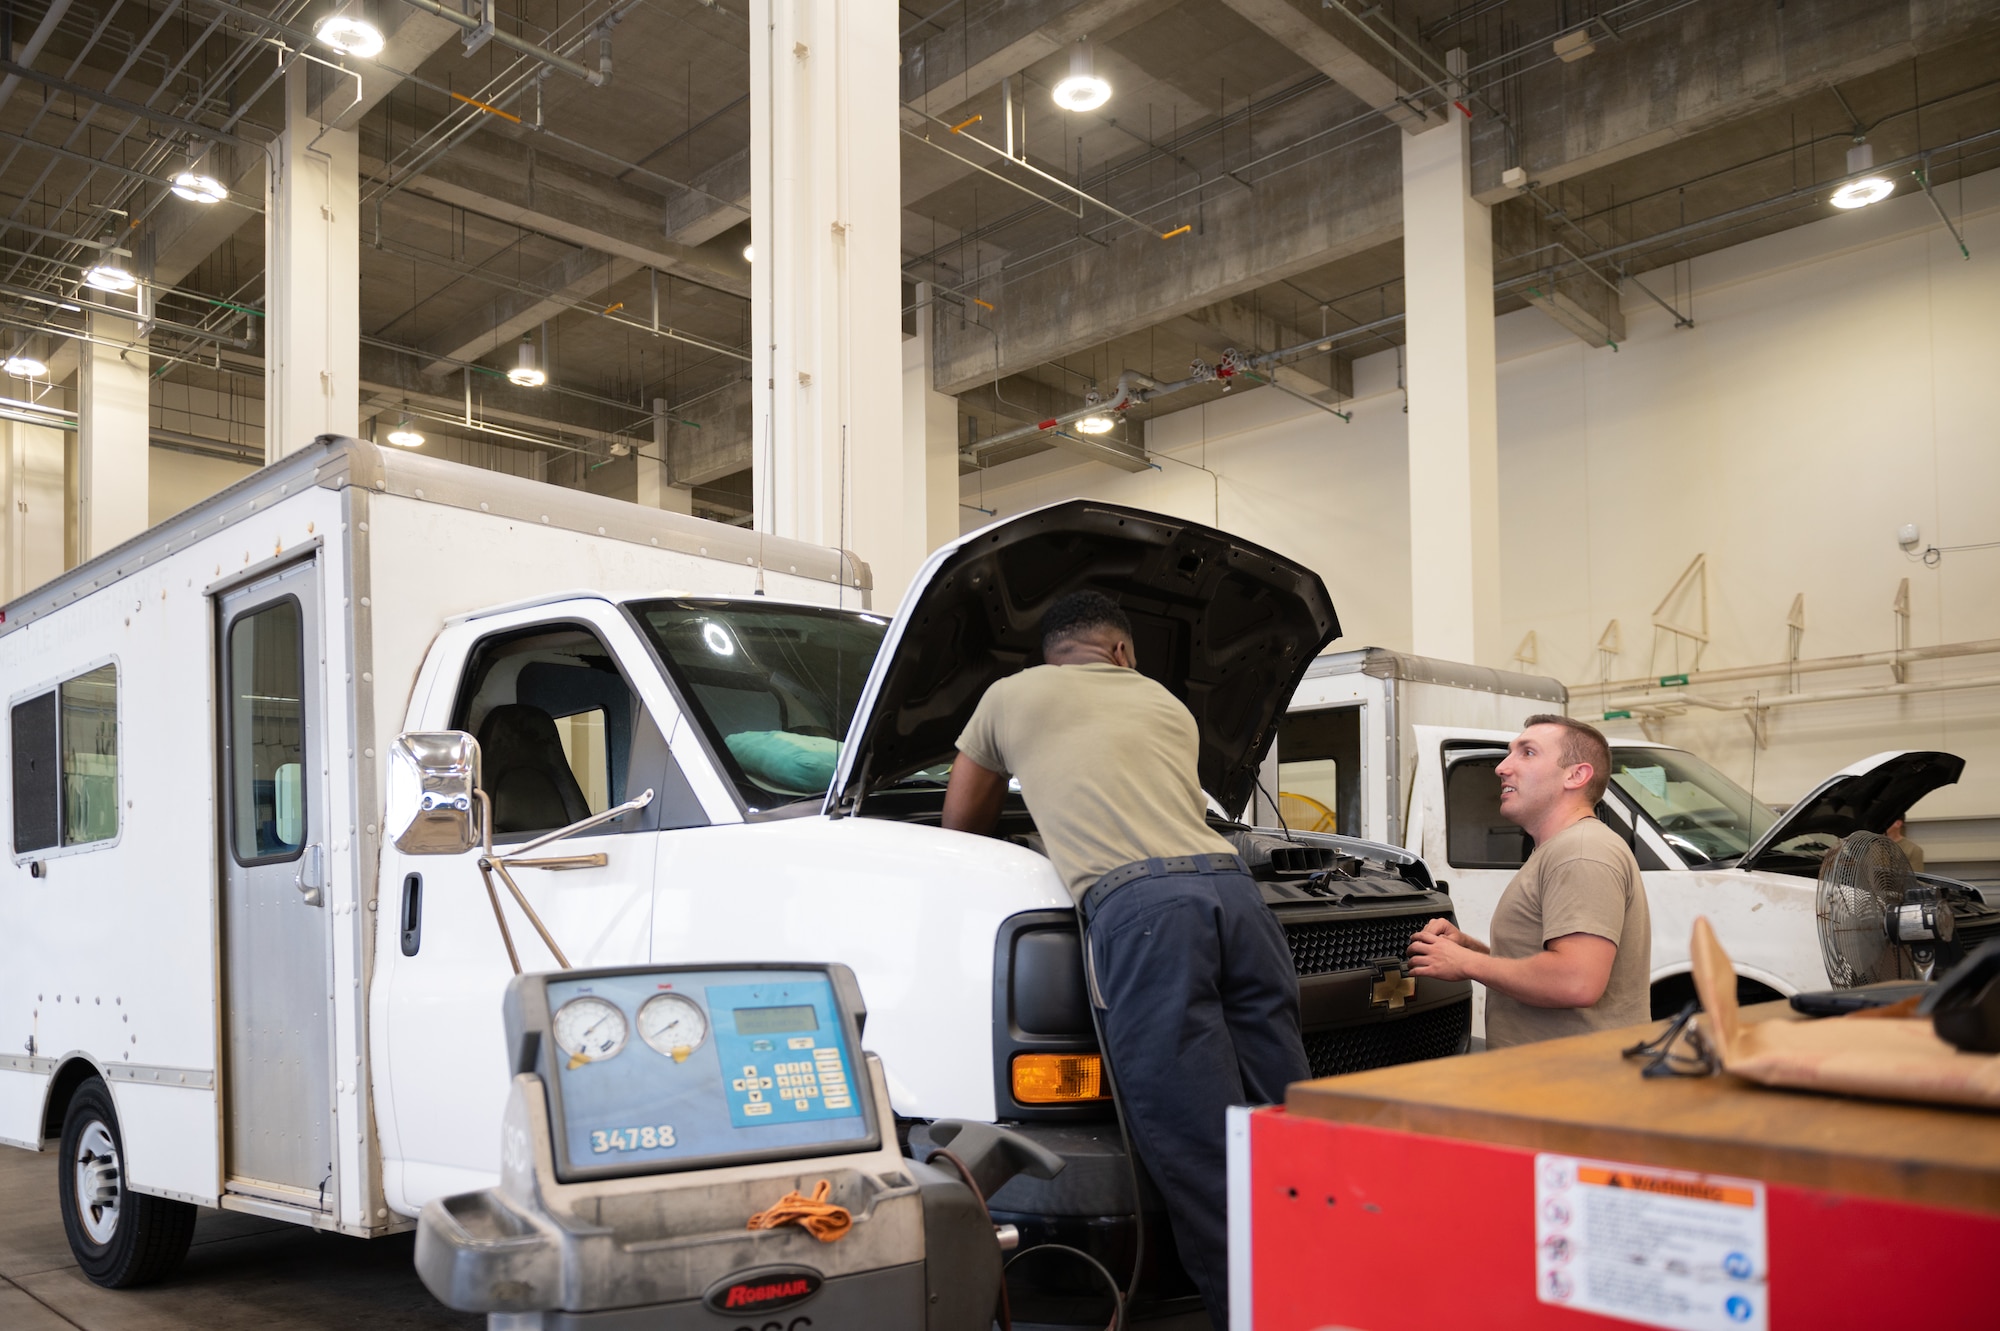 Airman performing maintenance on a vehicle and talking